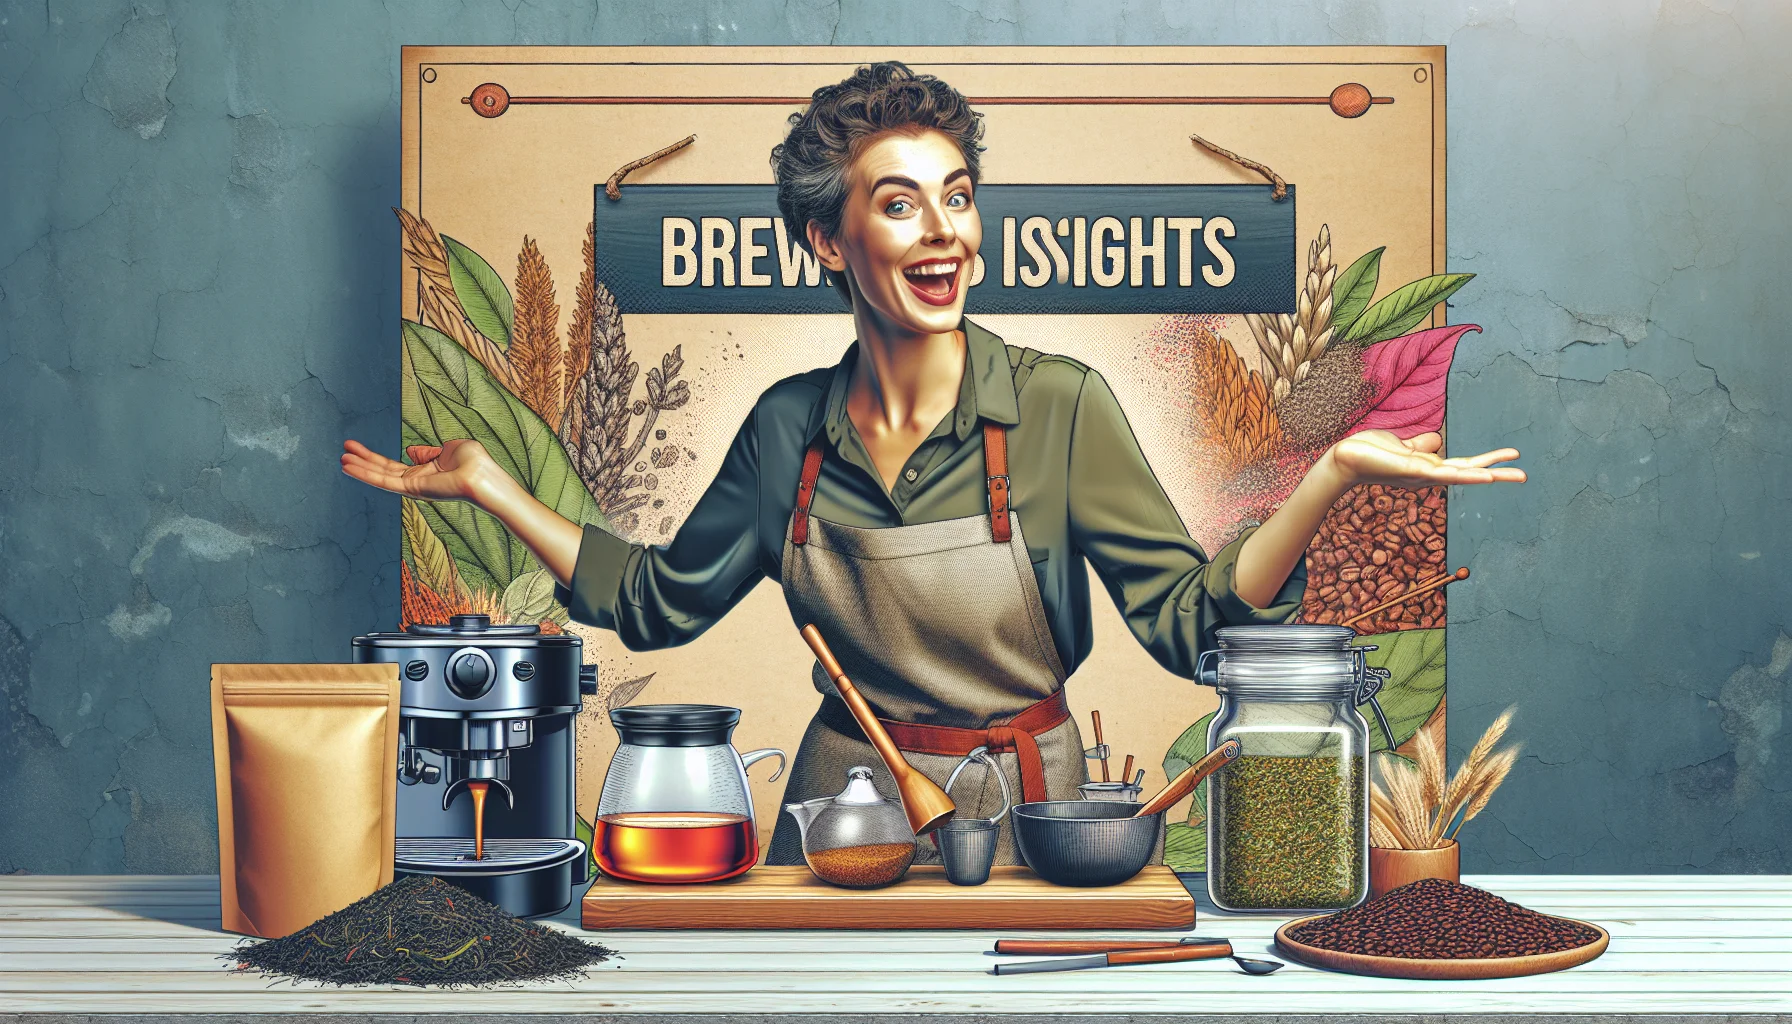 Create a realistic image highlighting vibrant insights into the art of tea and coffee brewing. Show an enthusiastic and humorous woman, who is skilled in her craft, as she enthusiastically demonstrates different brewing methods and products. She has short curly hair, wearing a barista apron, and is surrounded by various tea leaves and coffee beans, as well as brewing equipment. A sign in the background reads 'Brewing Insights'.